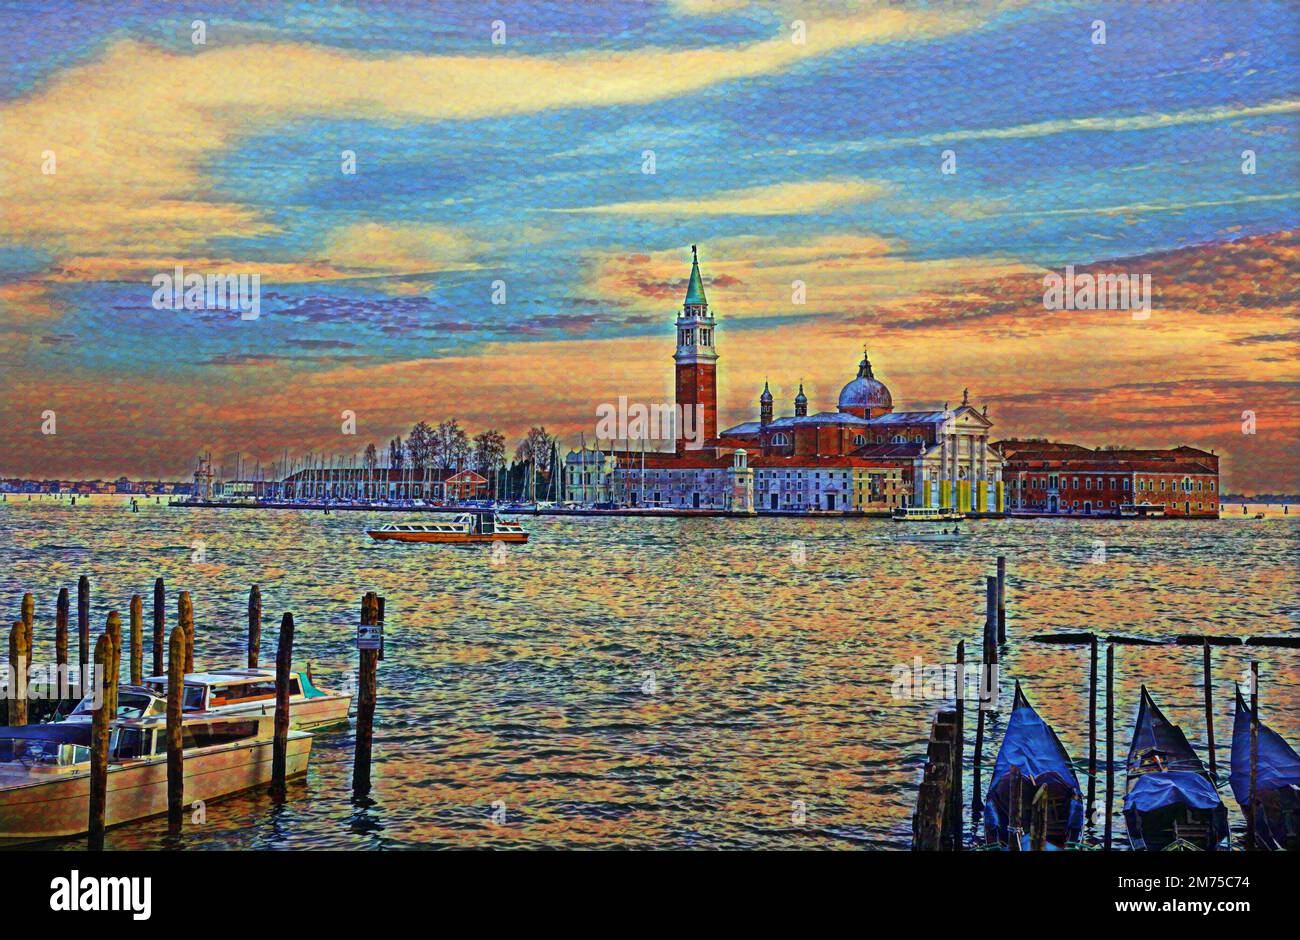 Digital watercolor painting effect of Grand Canal and Basilica Santa Maria della Salute, Venice, Italy in evening during autumn season Stock Photo